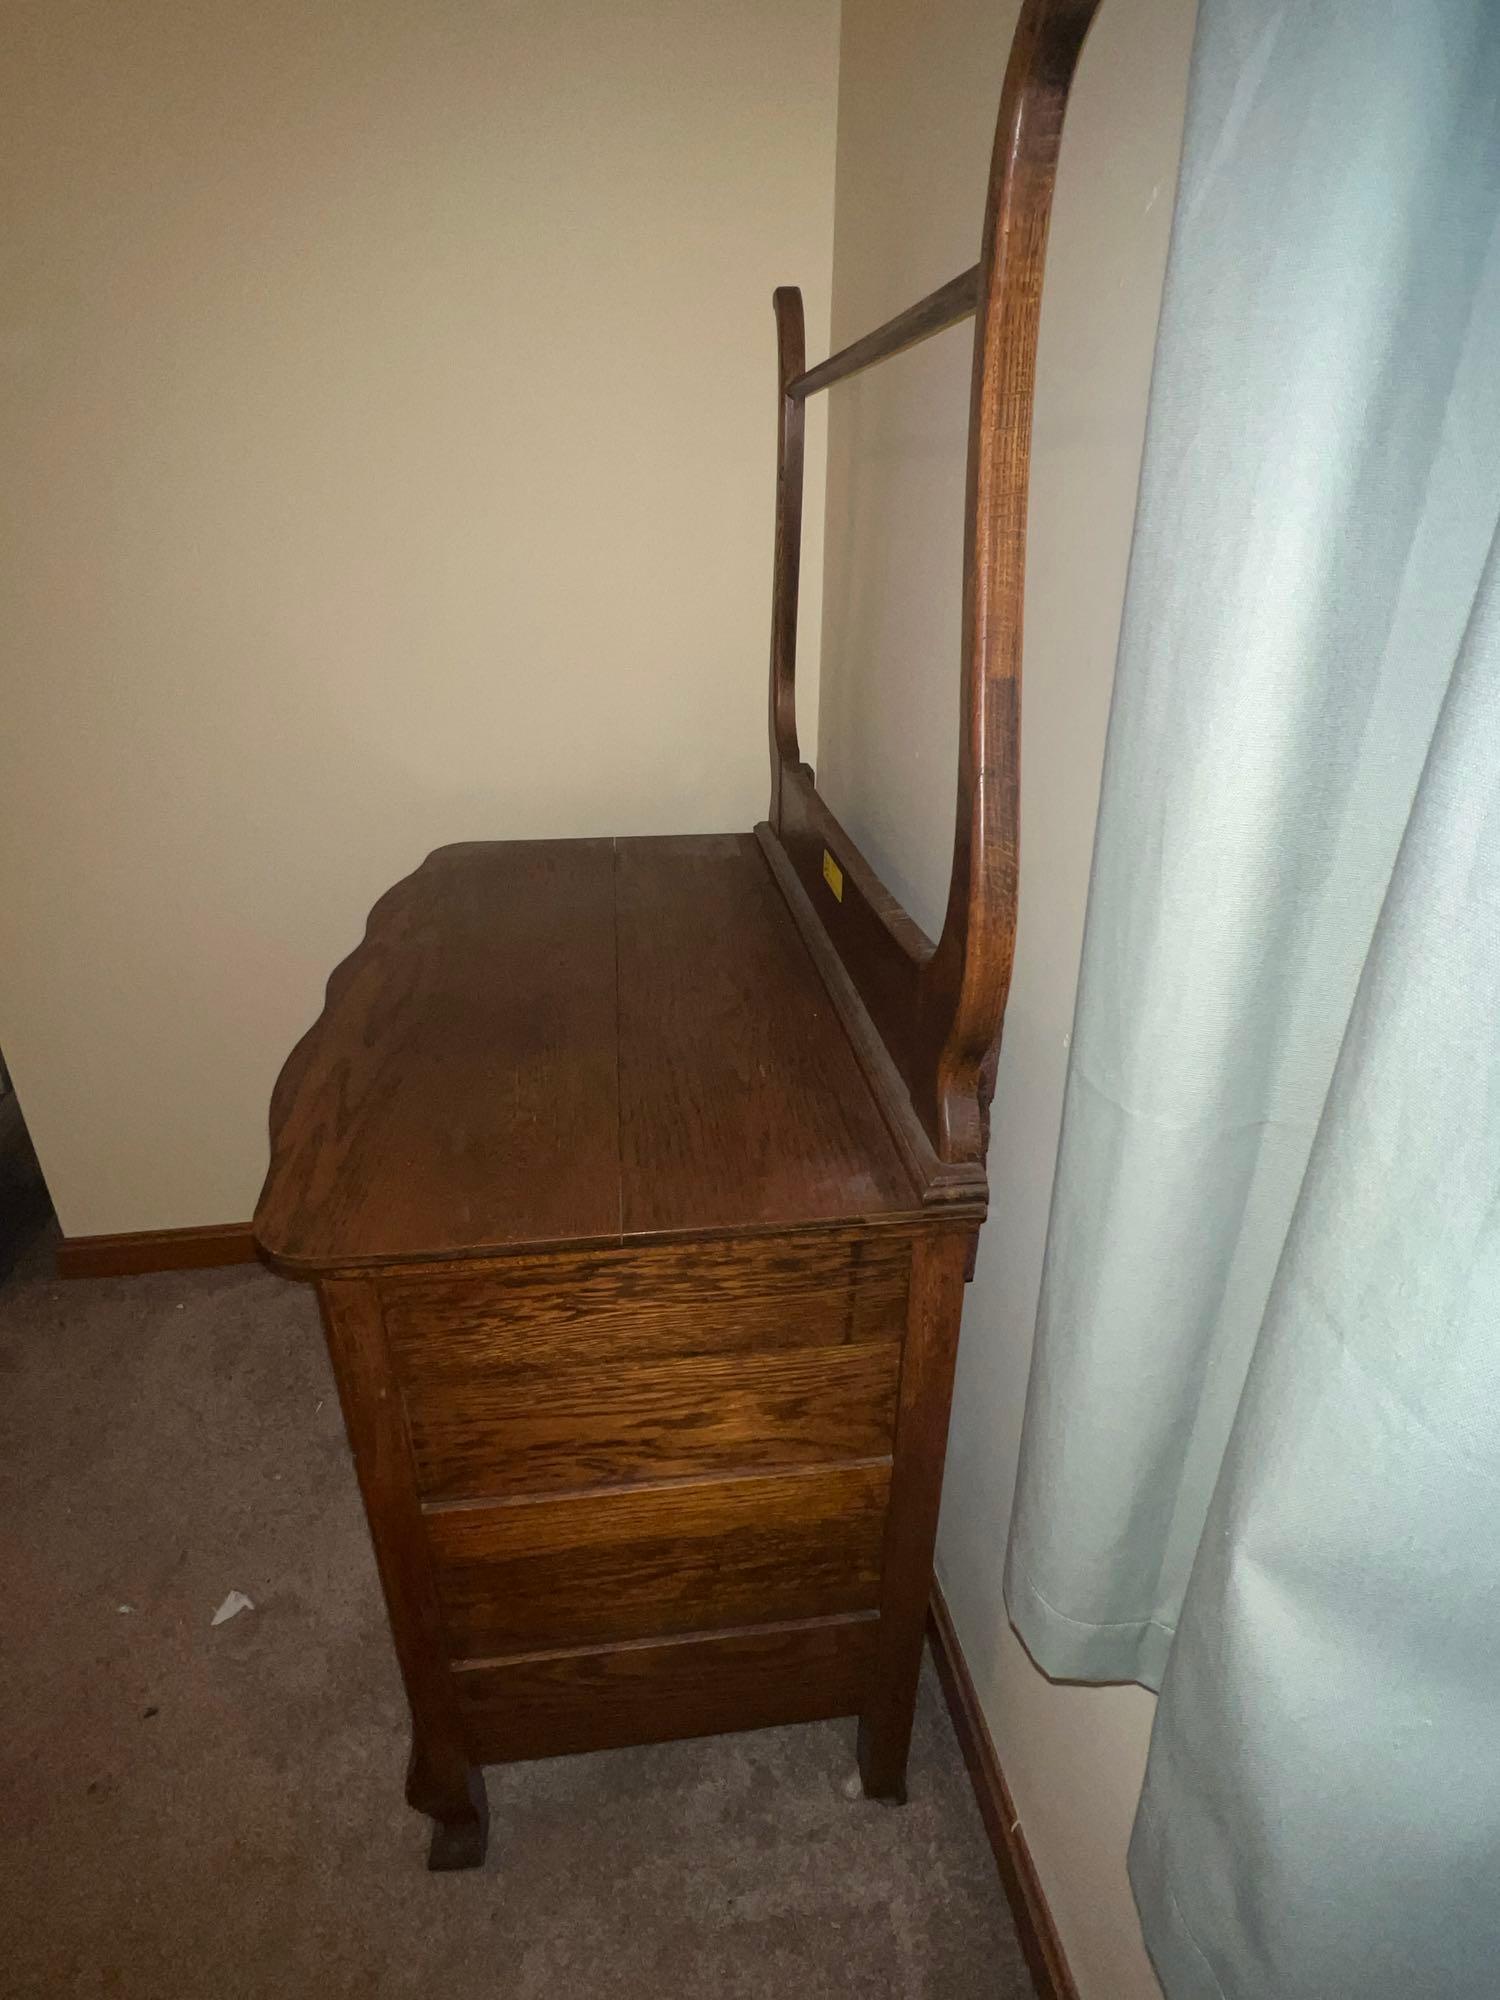 Antique Wash Stand Dresser with Towel Rack